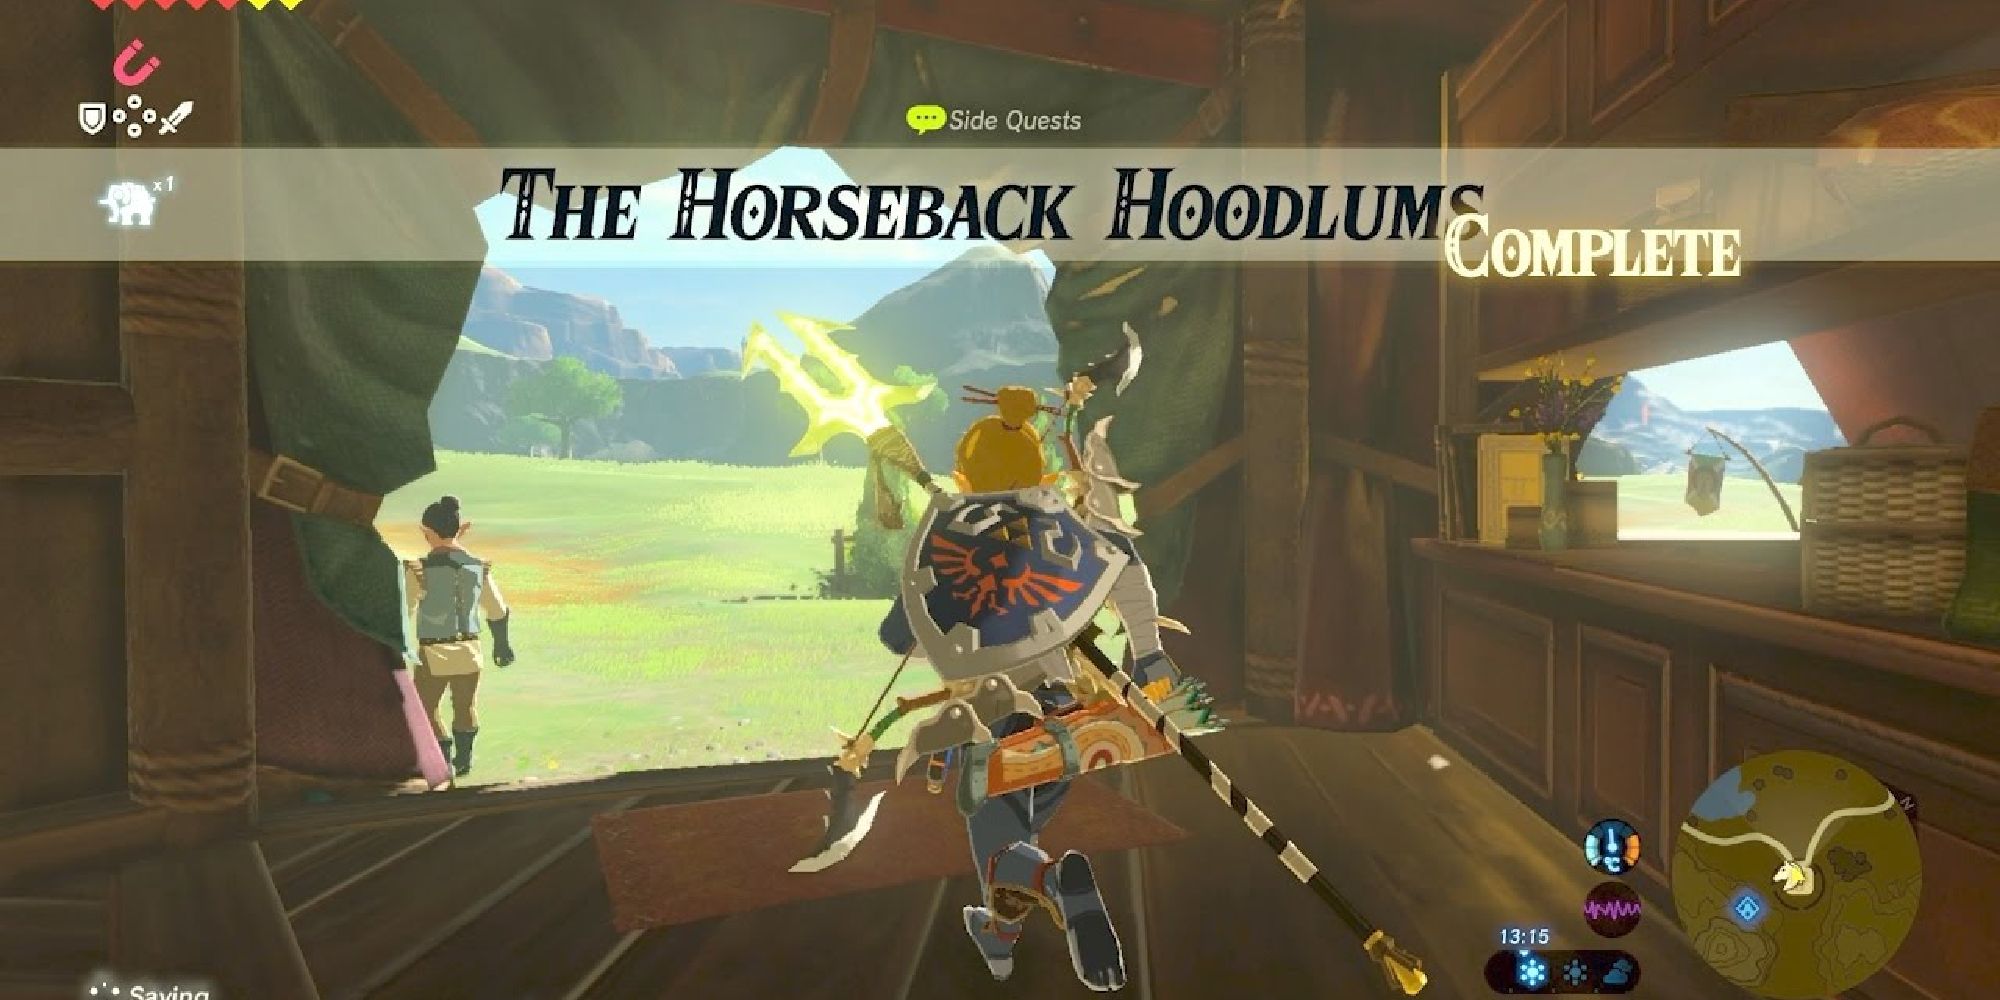 Link leaving a stable after completing the side quest "The Horseback Hoodlums"